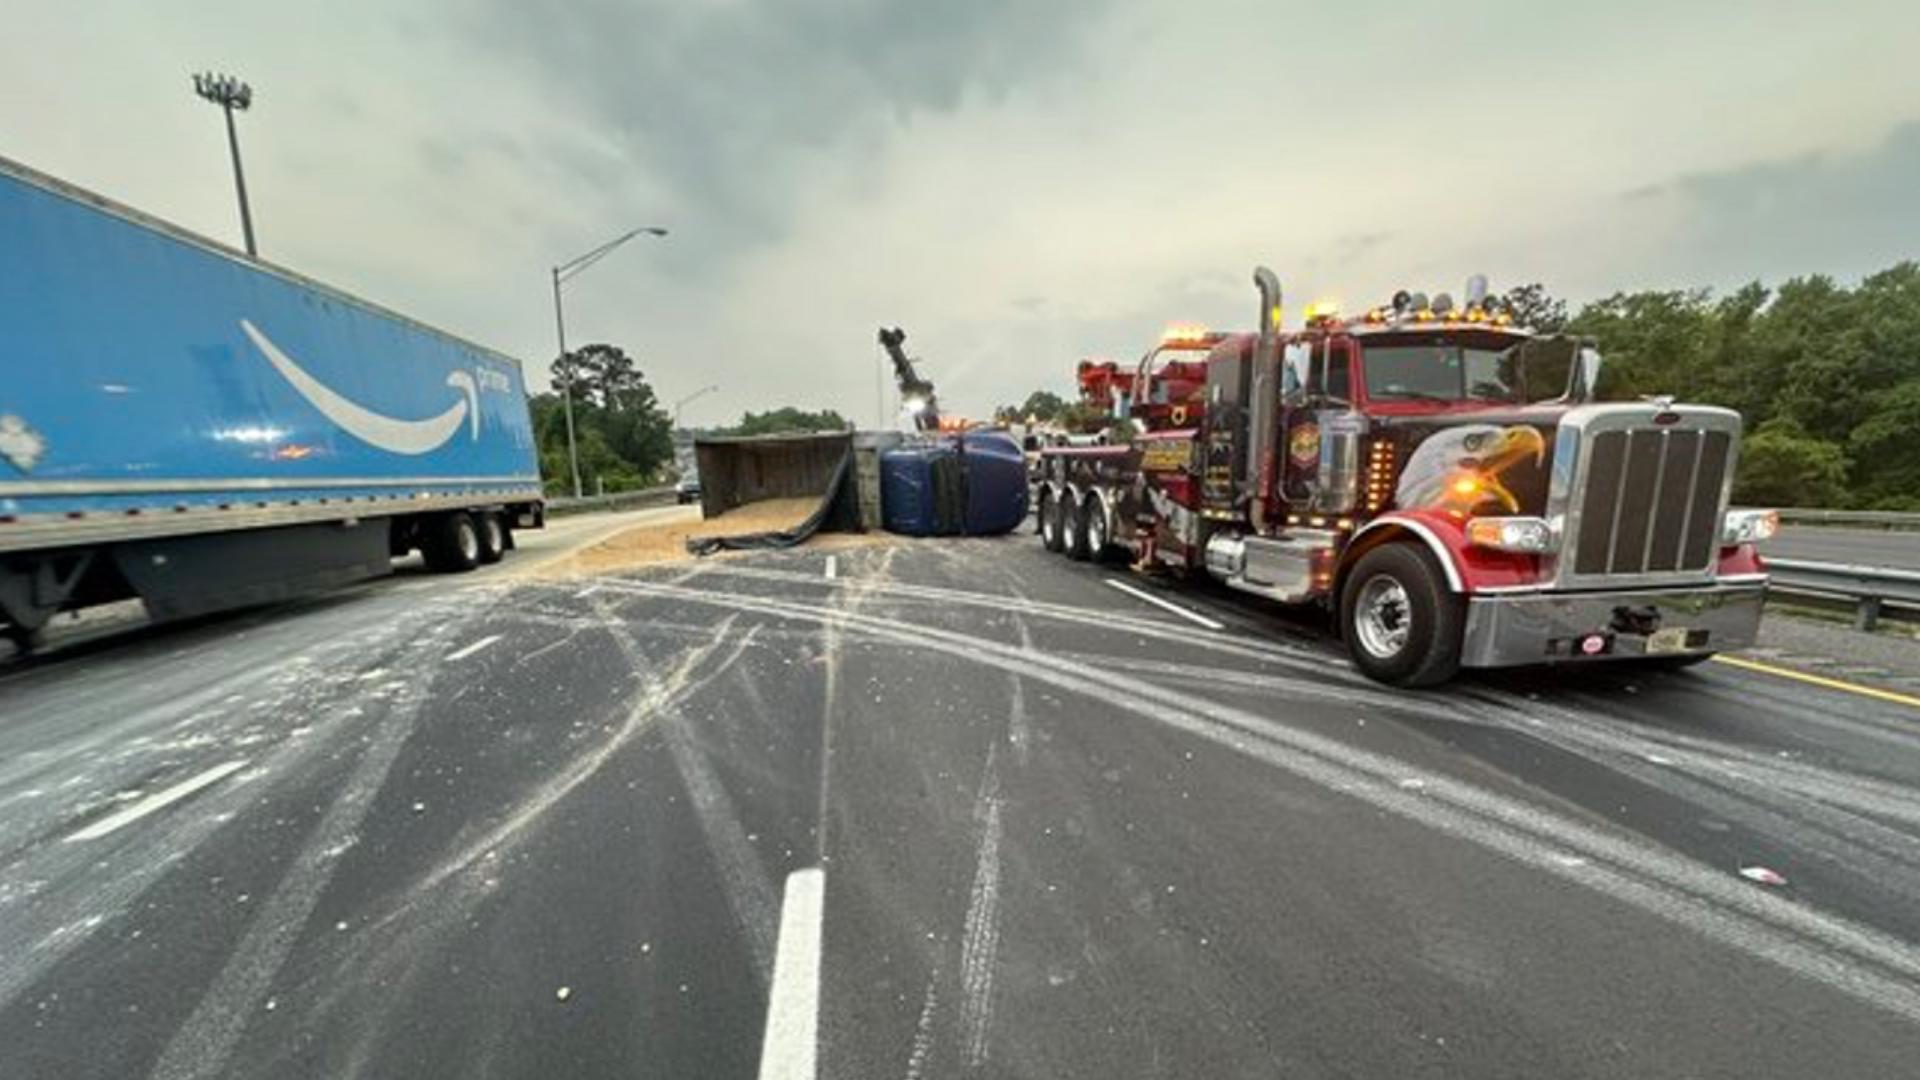 Drivers should use caution in the area as the overturned dump truck has spilled sand onto the interstate.